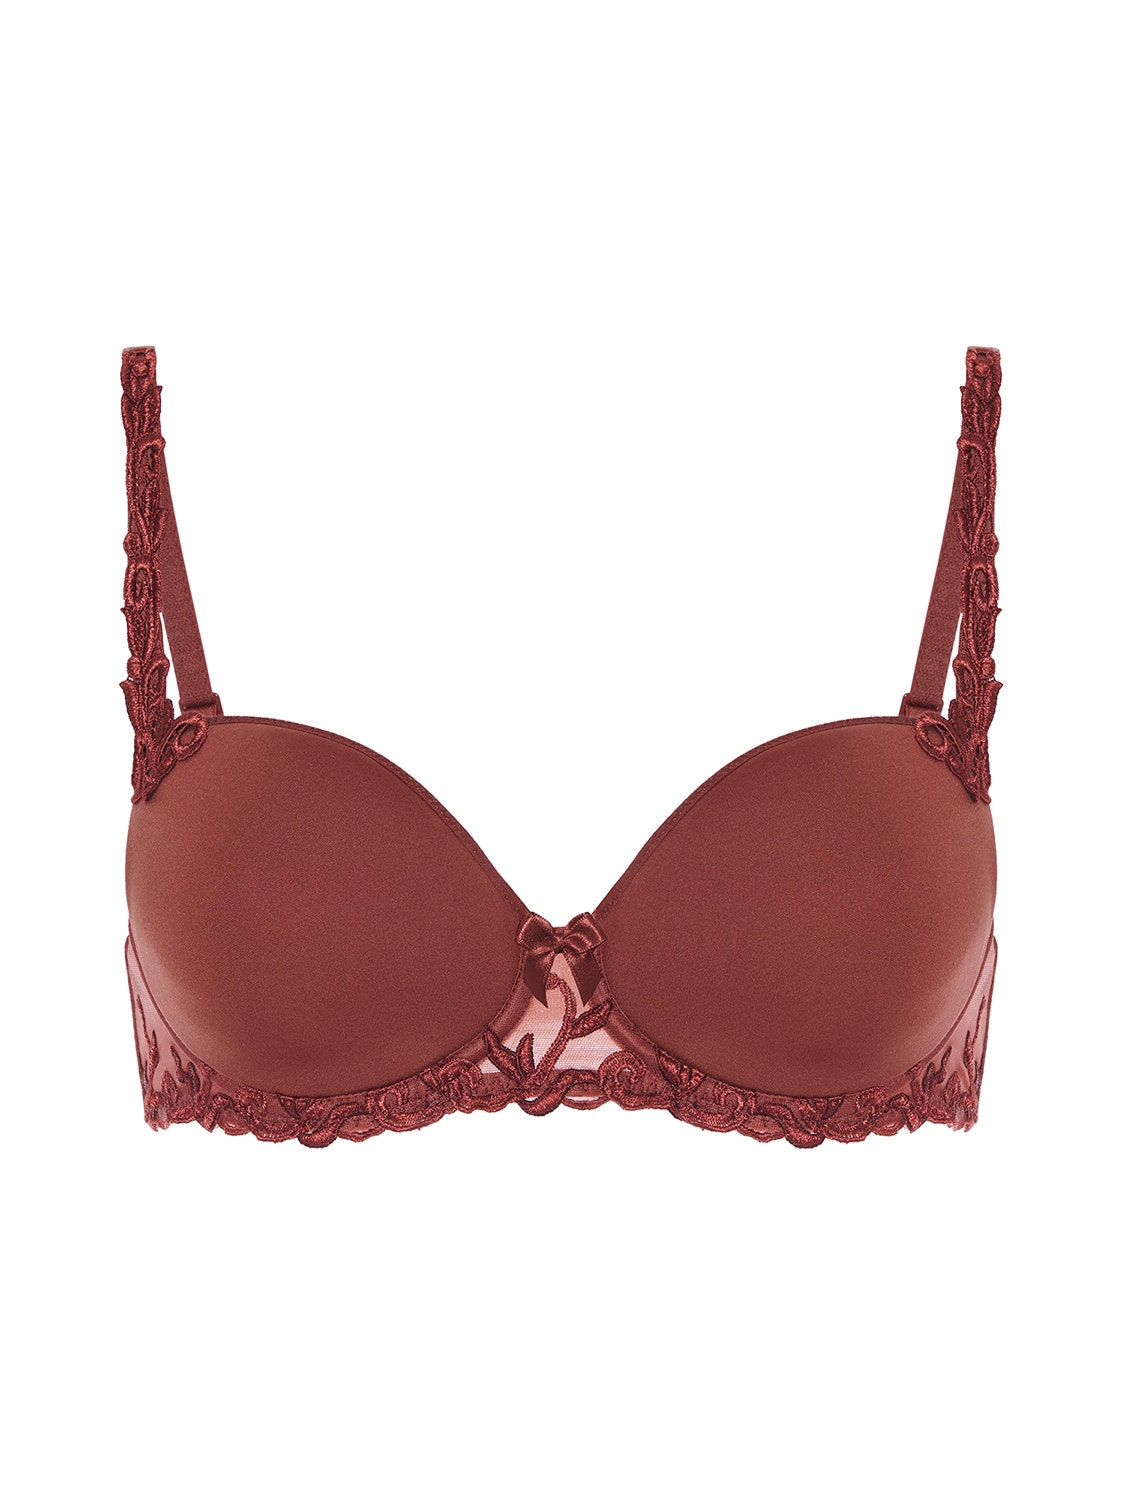 Simone Perele Asta Triangle Push-Up Bra in Navy FINAL SALE (50% Off) -  Busted Bra Shop